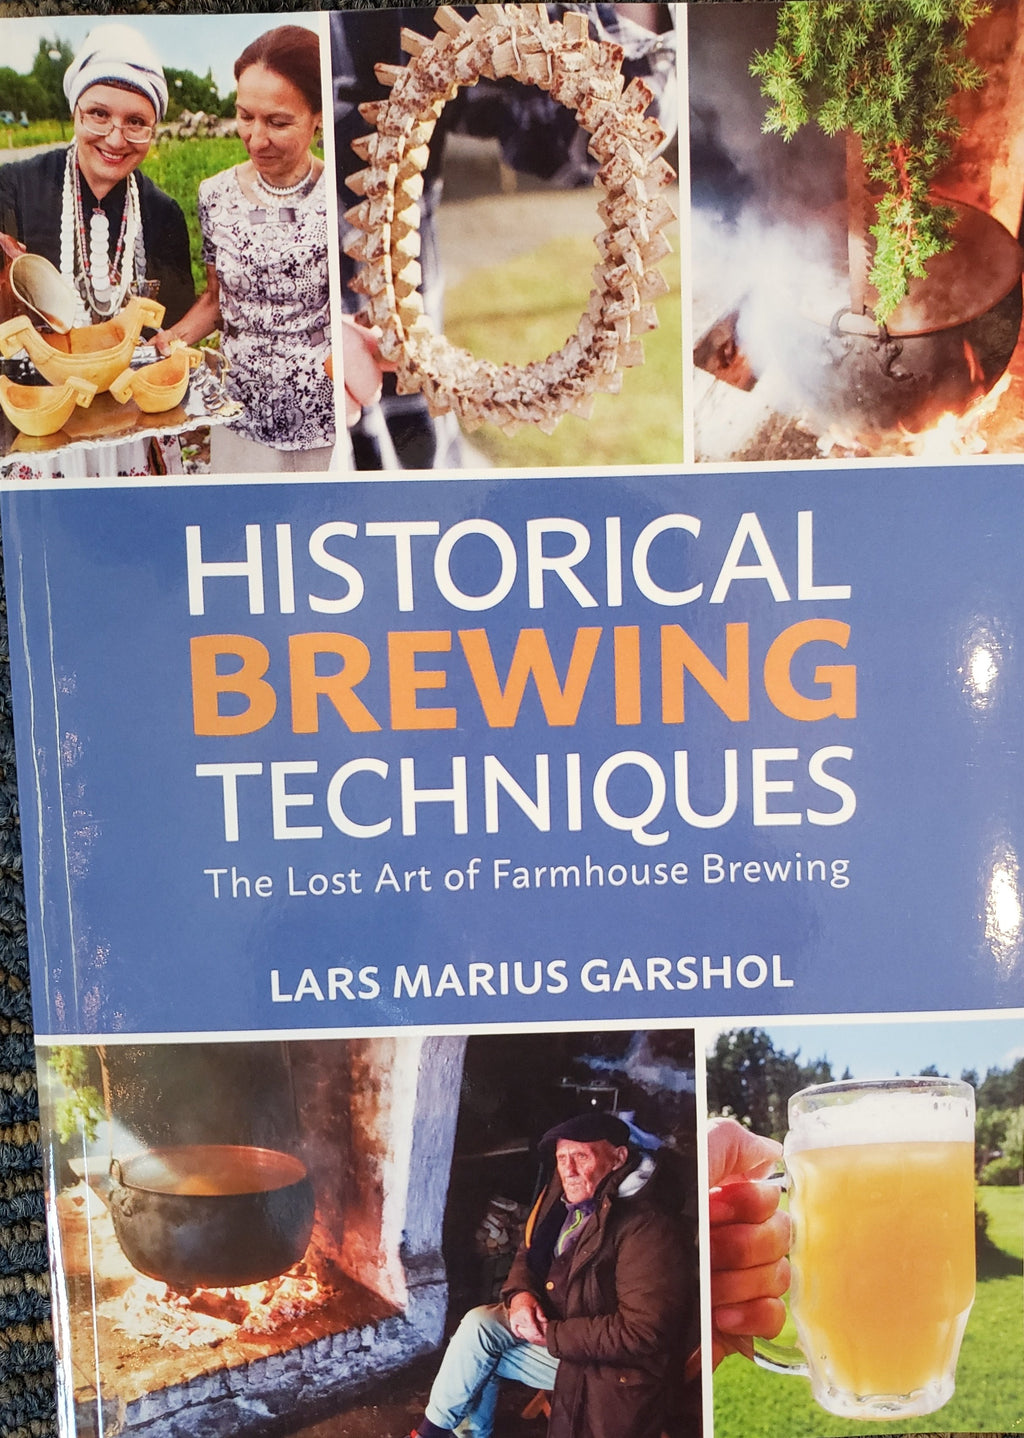 Historical Brewing Techniques by Lars Marius Garshol